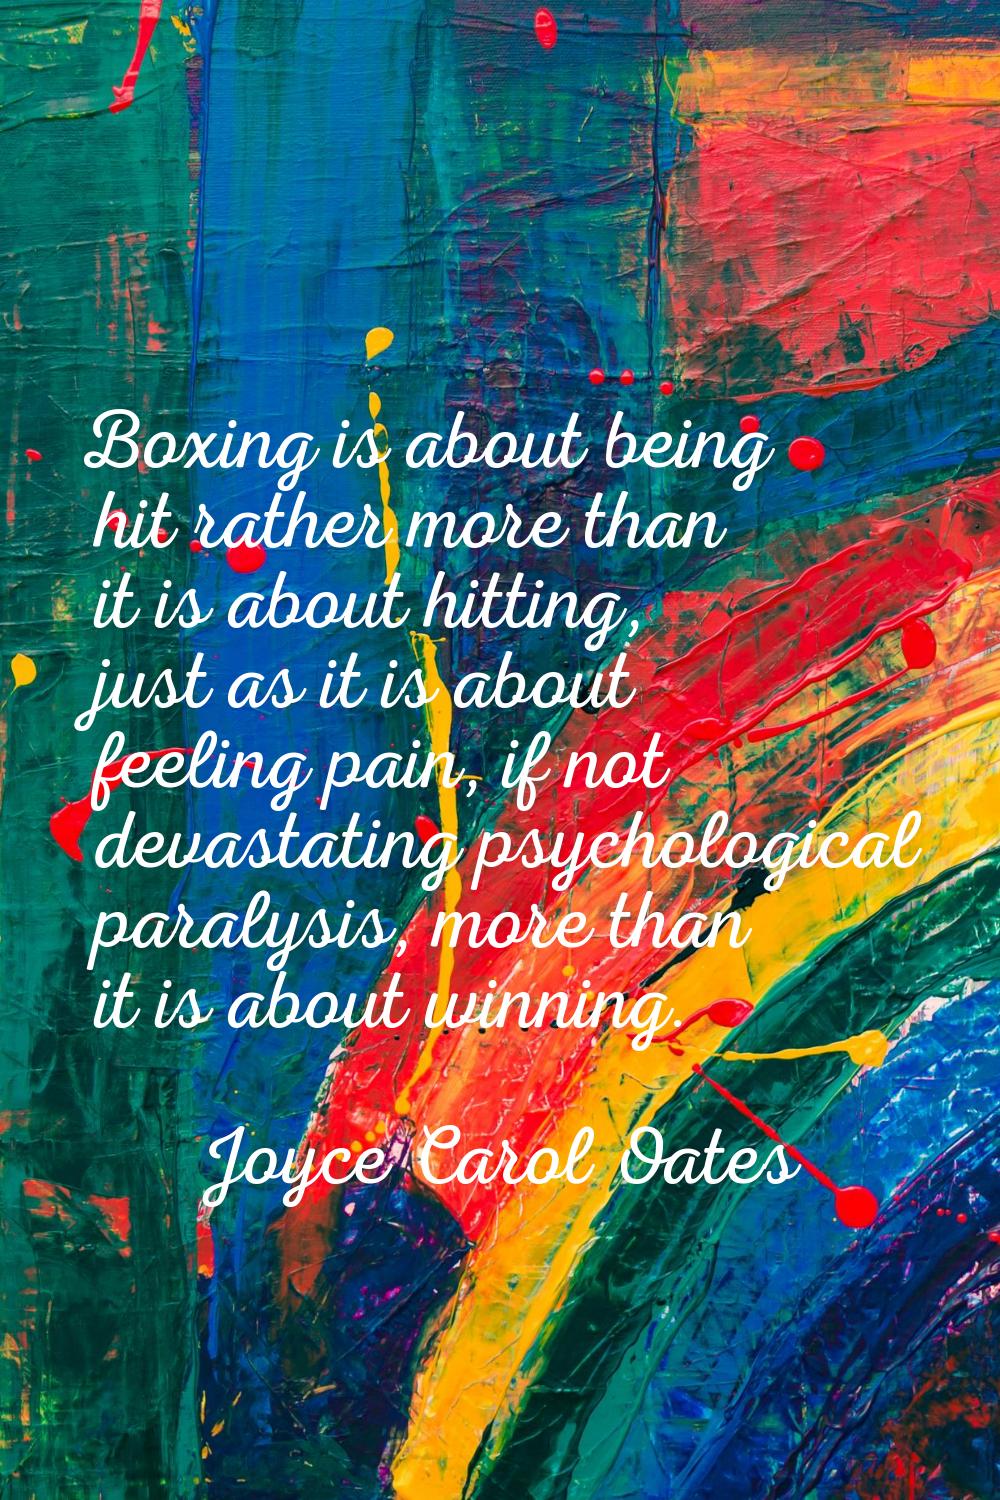 Boxing is about being hit rather more than it is about hitting, just as it is about feeling pain, i